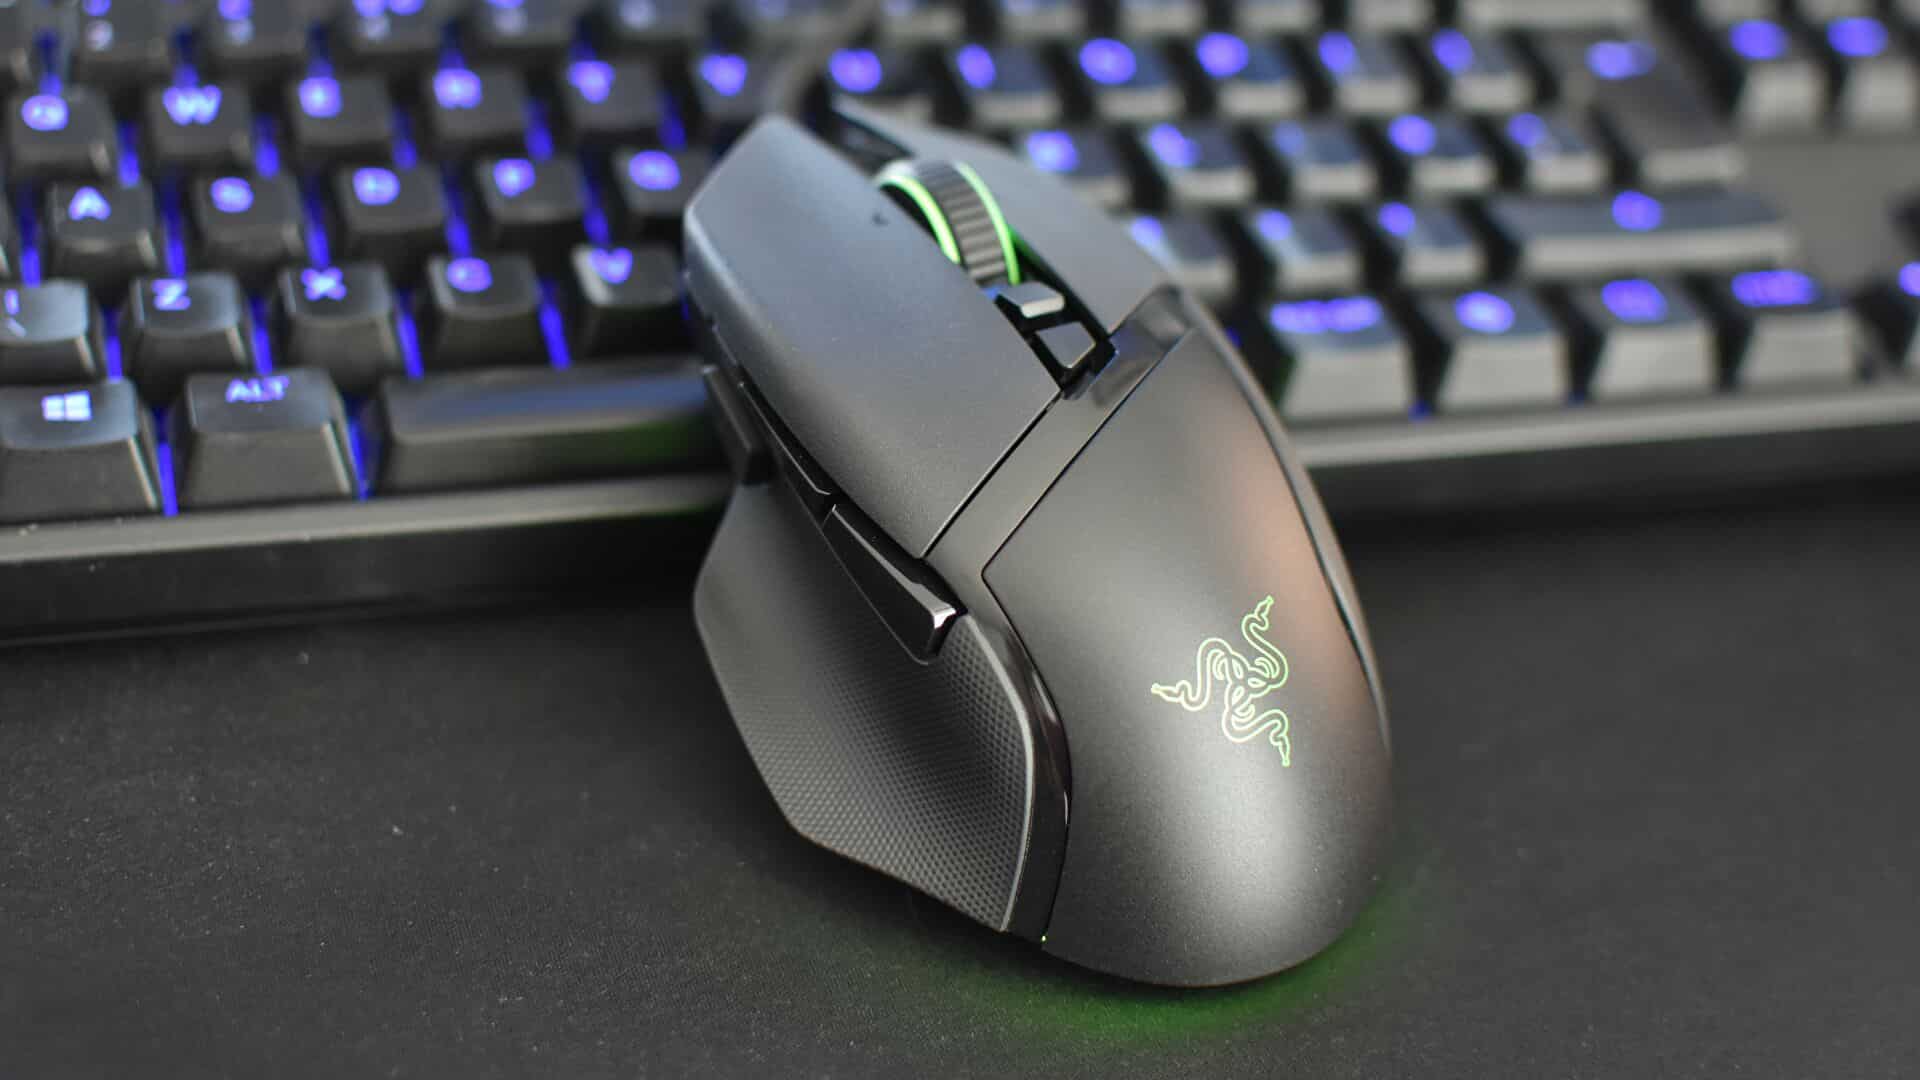 Prime Day deal spotlight: my current favorite gaming mouse hits a new price low